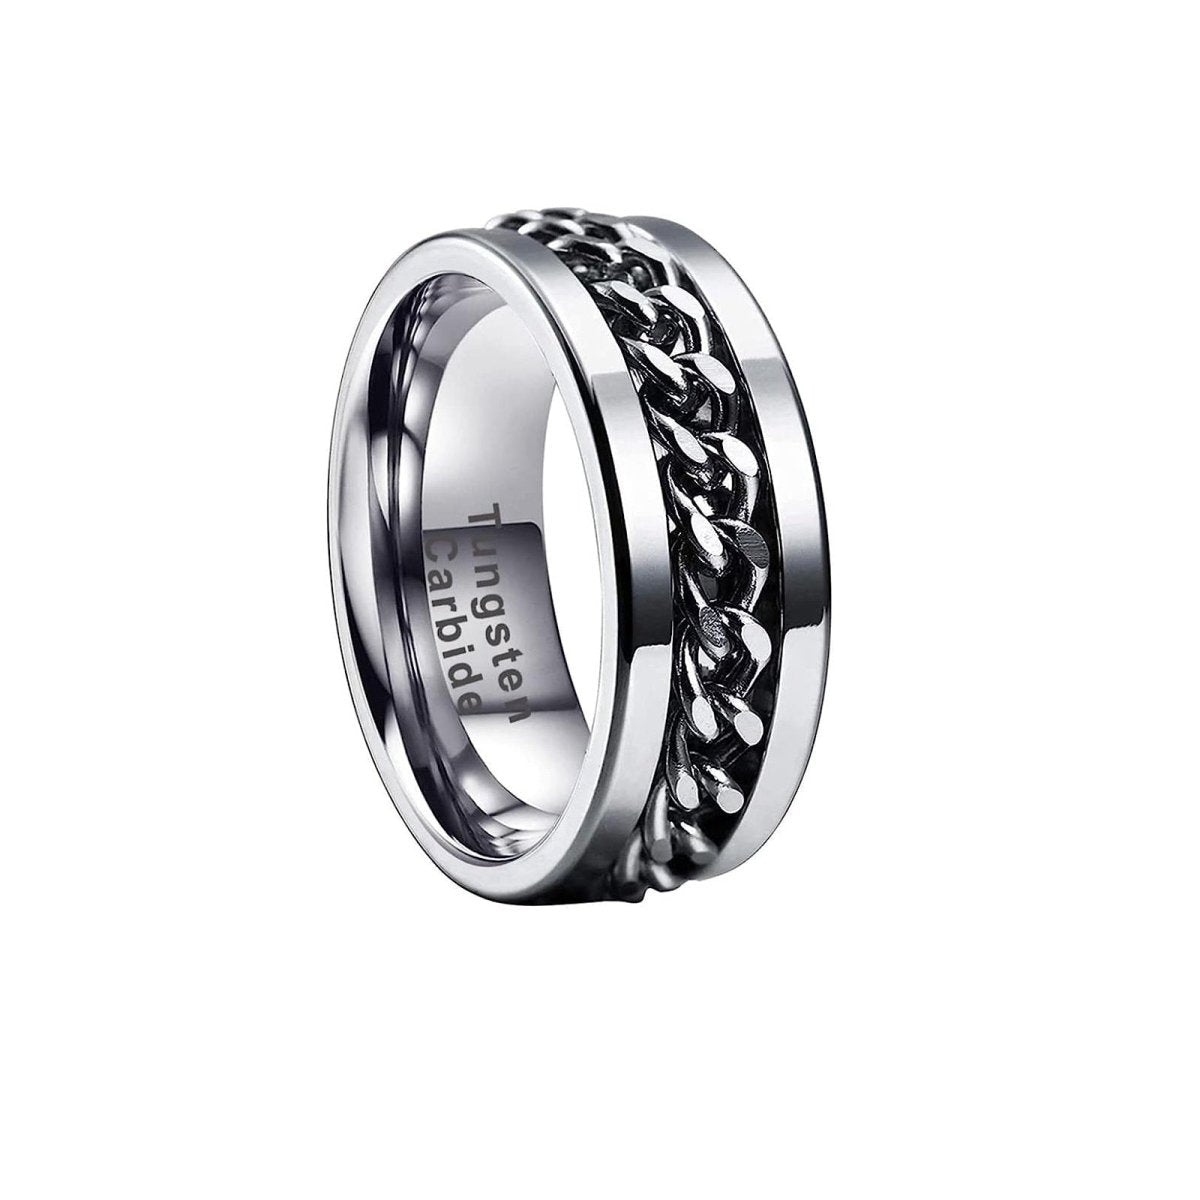 Silver Spinner - Silver Tungsten with Silver Chain Spinner Fidget Ring